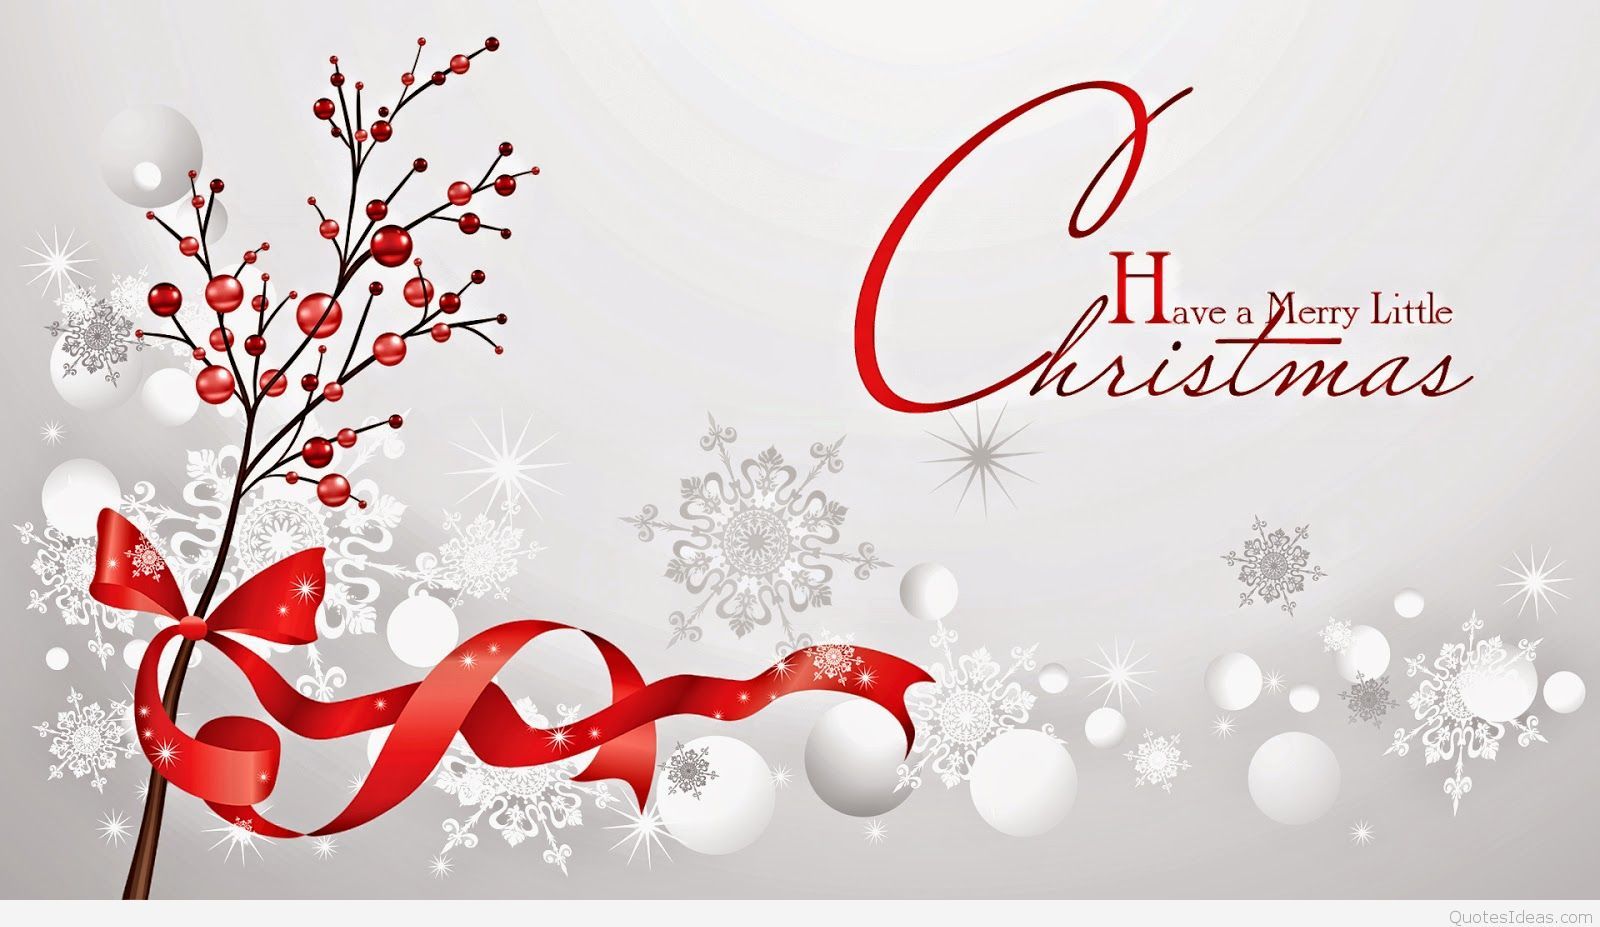 Merry Christmas eve wallpaper quotes & Christmas cards